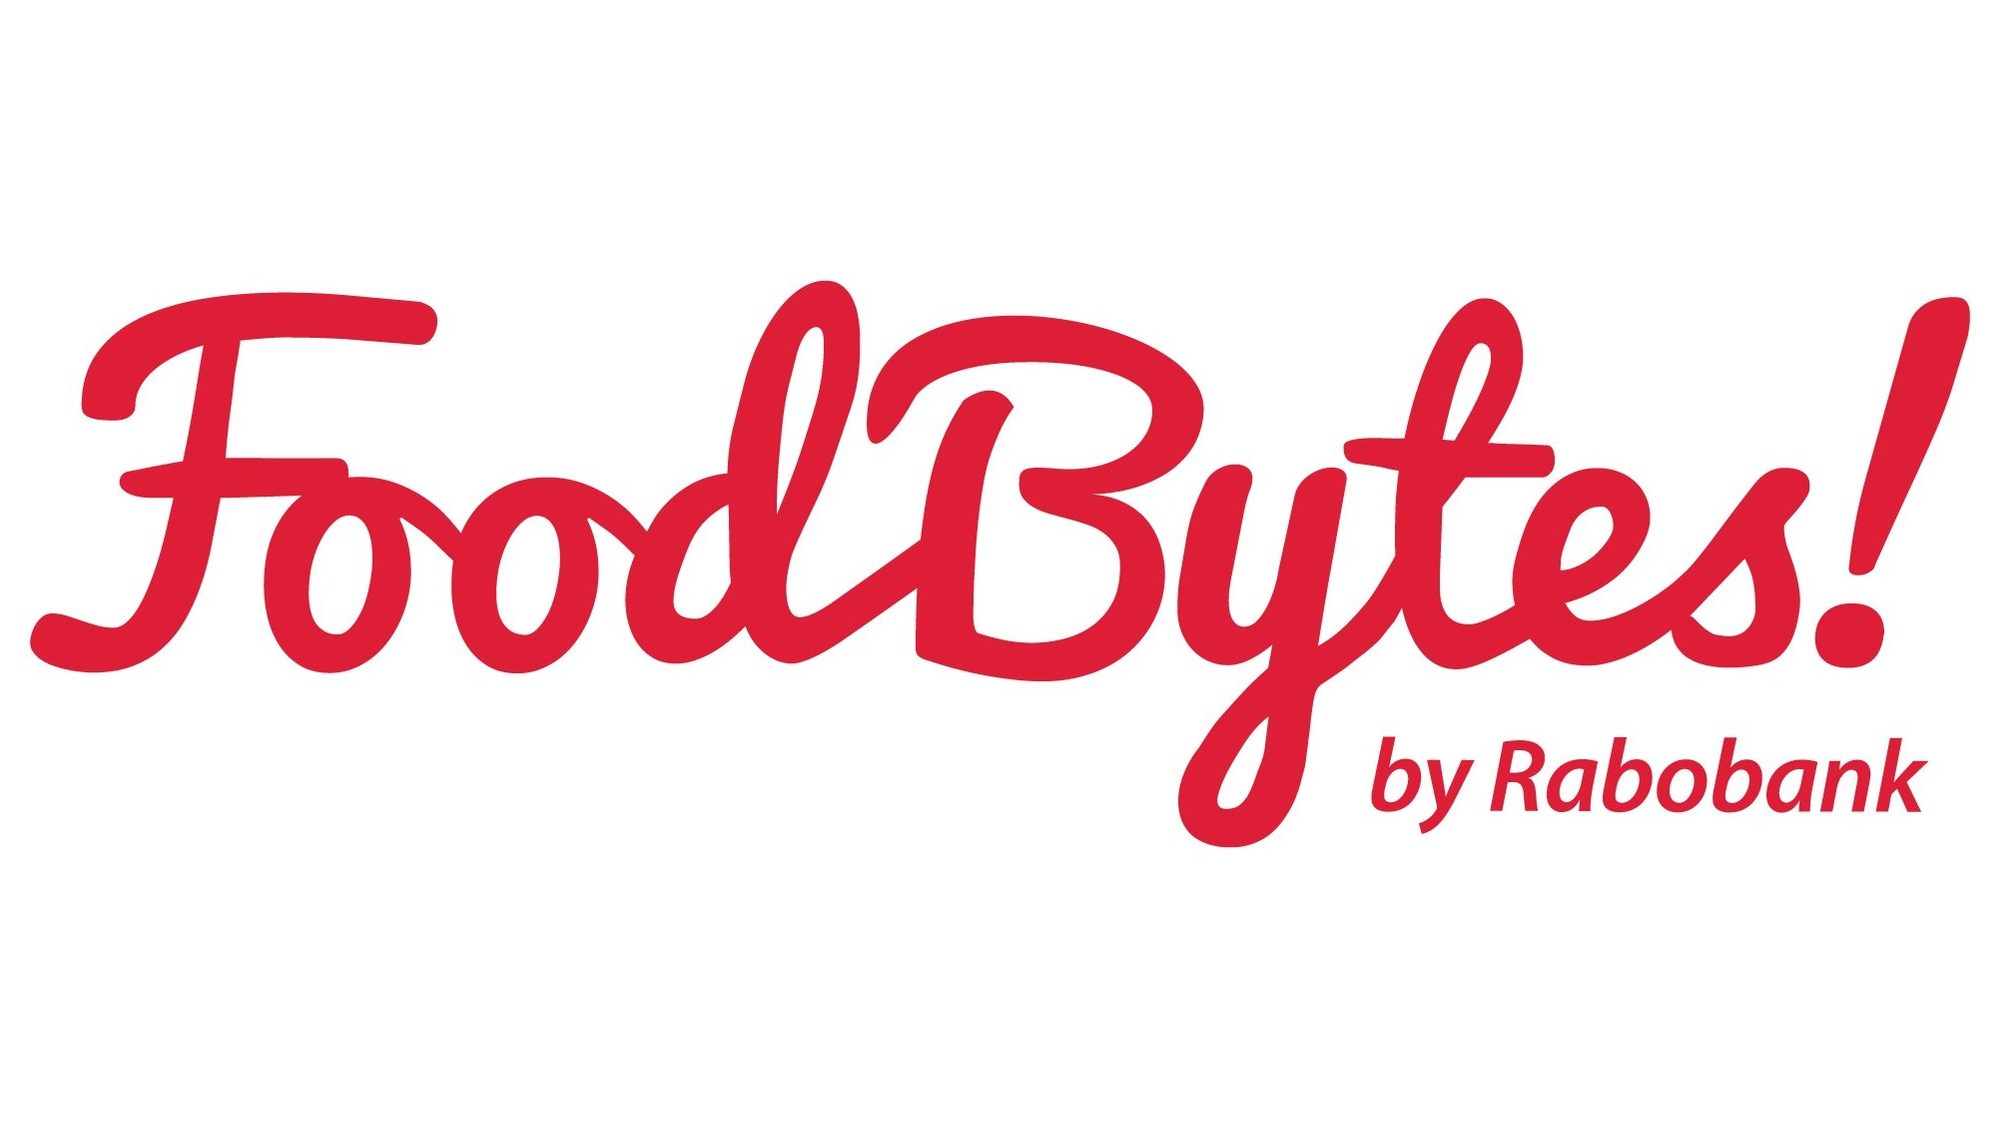 Hypercell Technologies Selected as Standout Startup for FoodBytes! Program 3 Hypercell Technologies Selected as Standout Startup for FoodBytes! Program